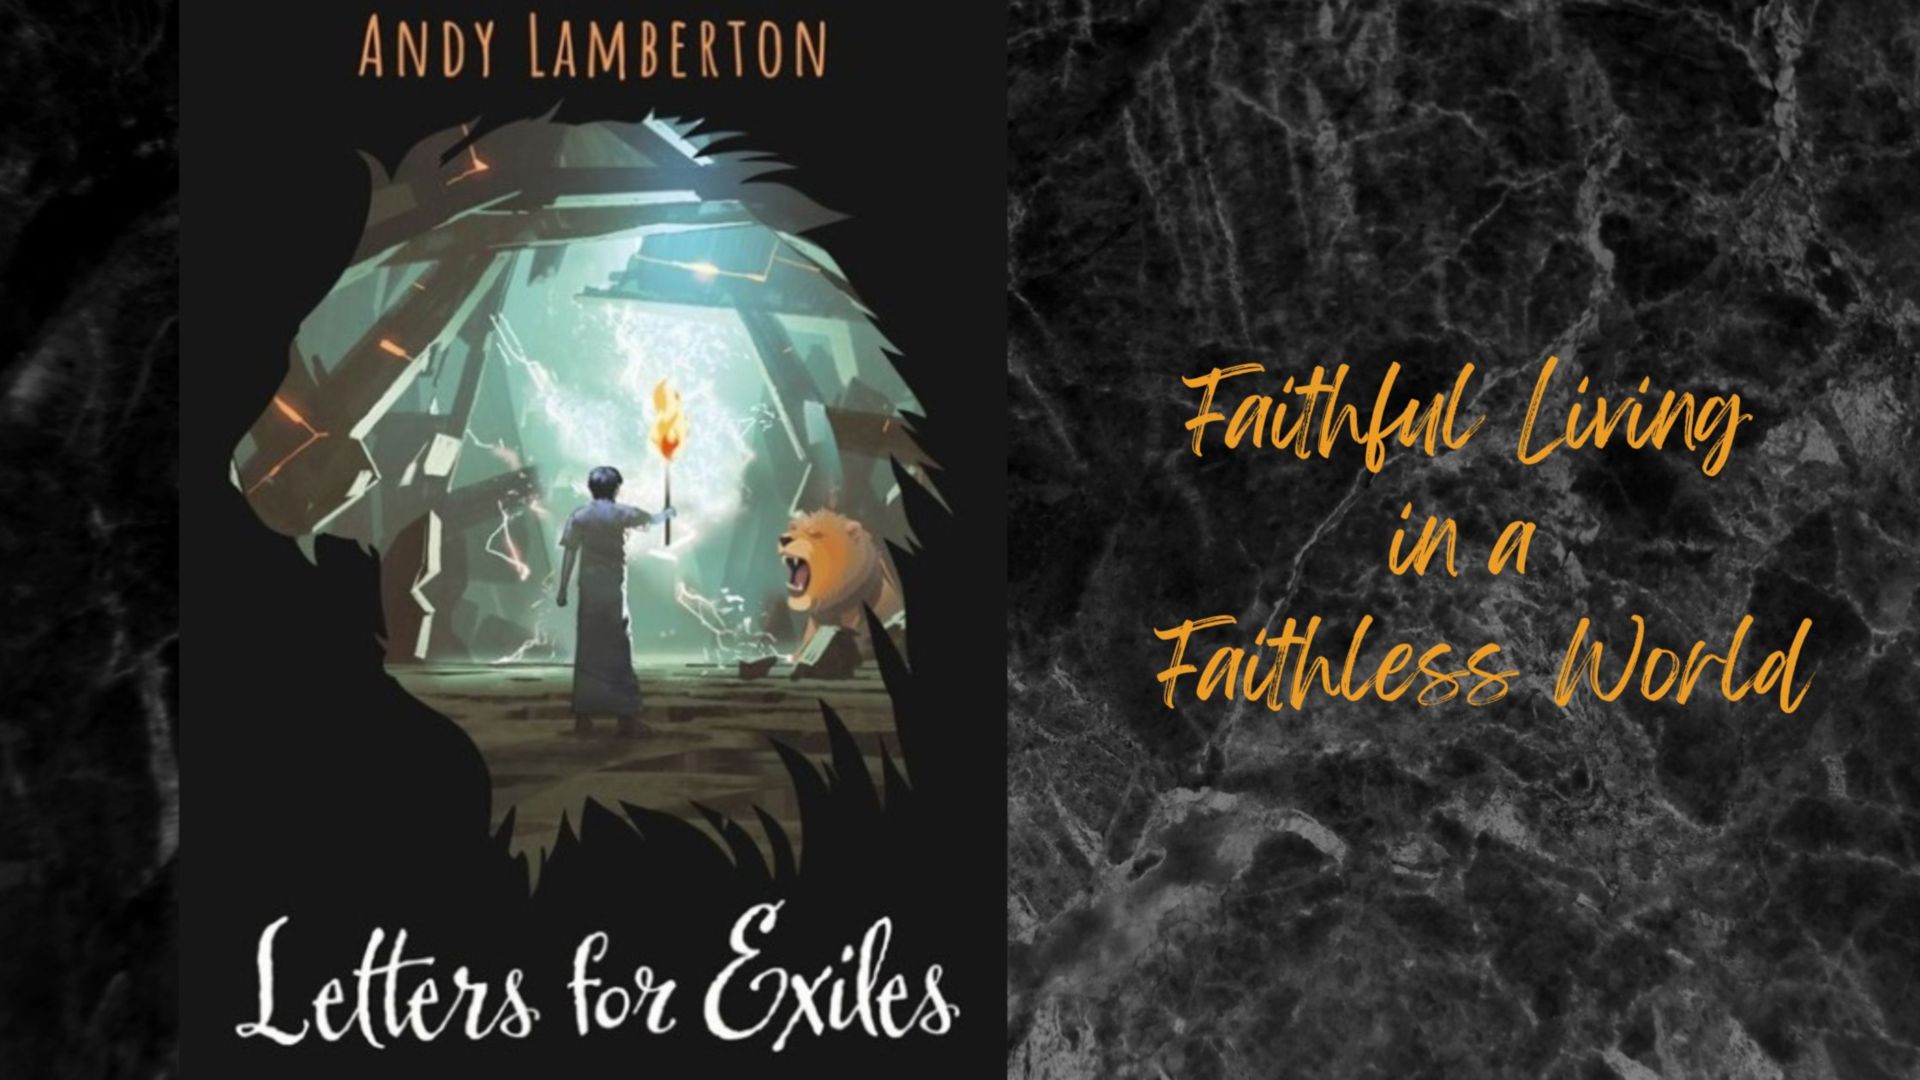 A review of the book 'Letters for Exiles' by Andy Lamberton